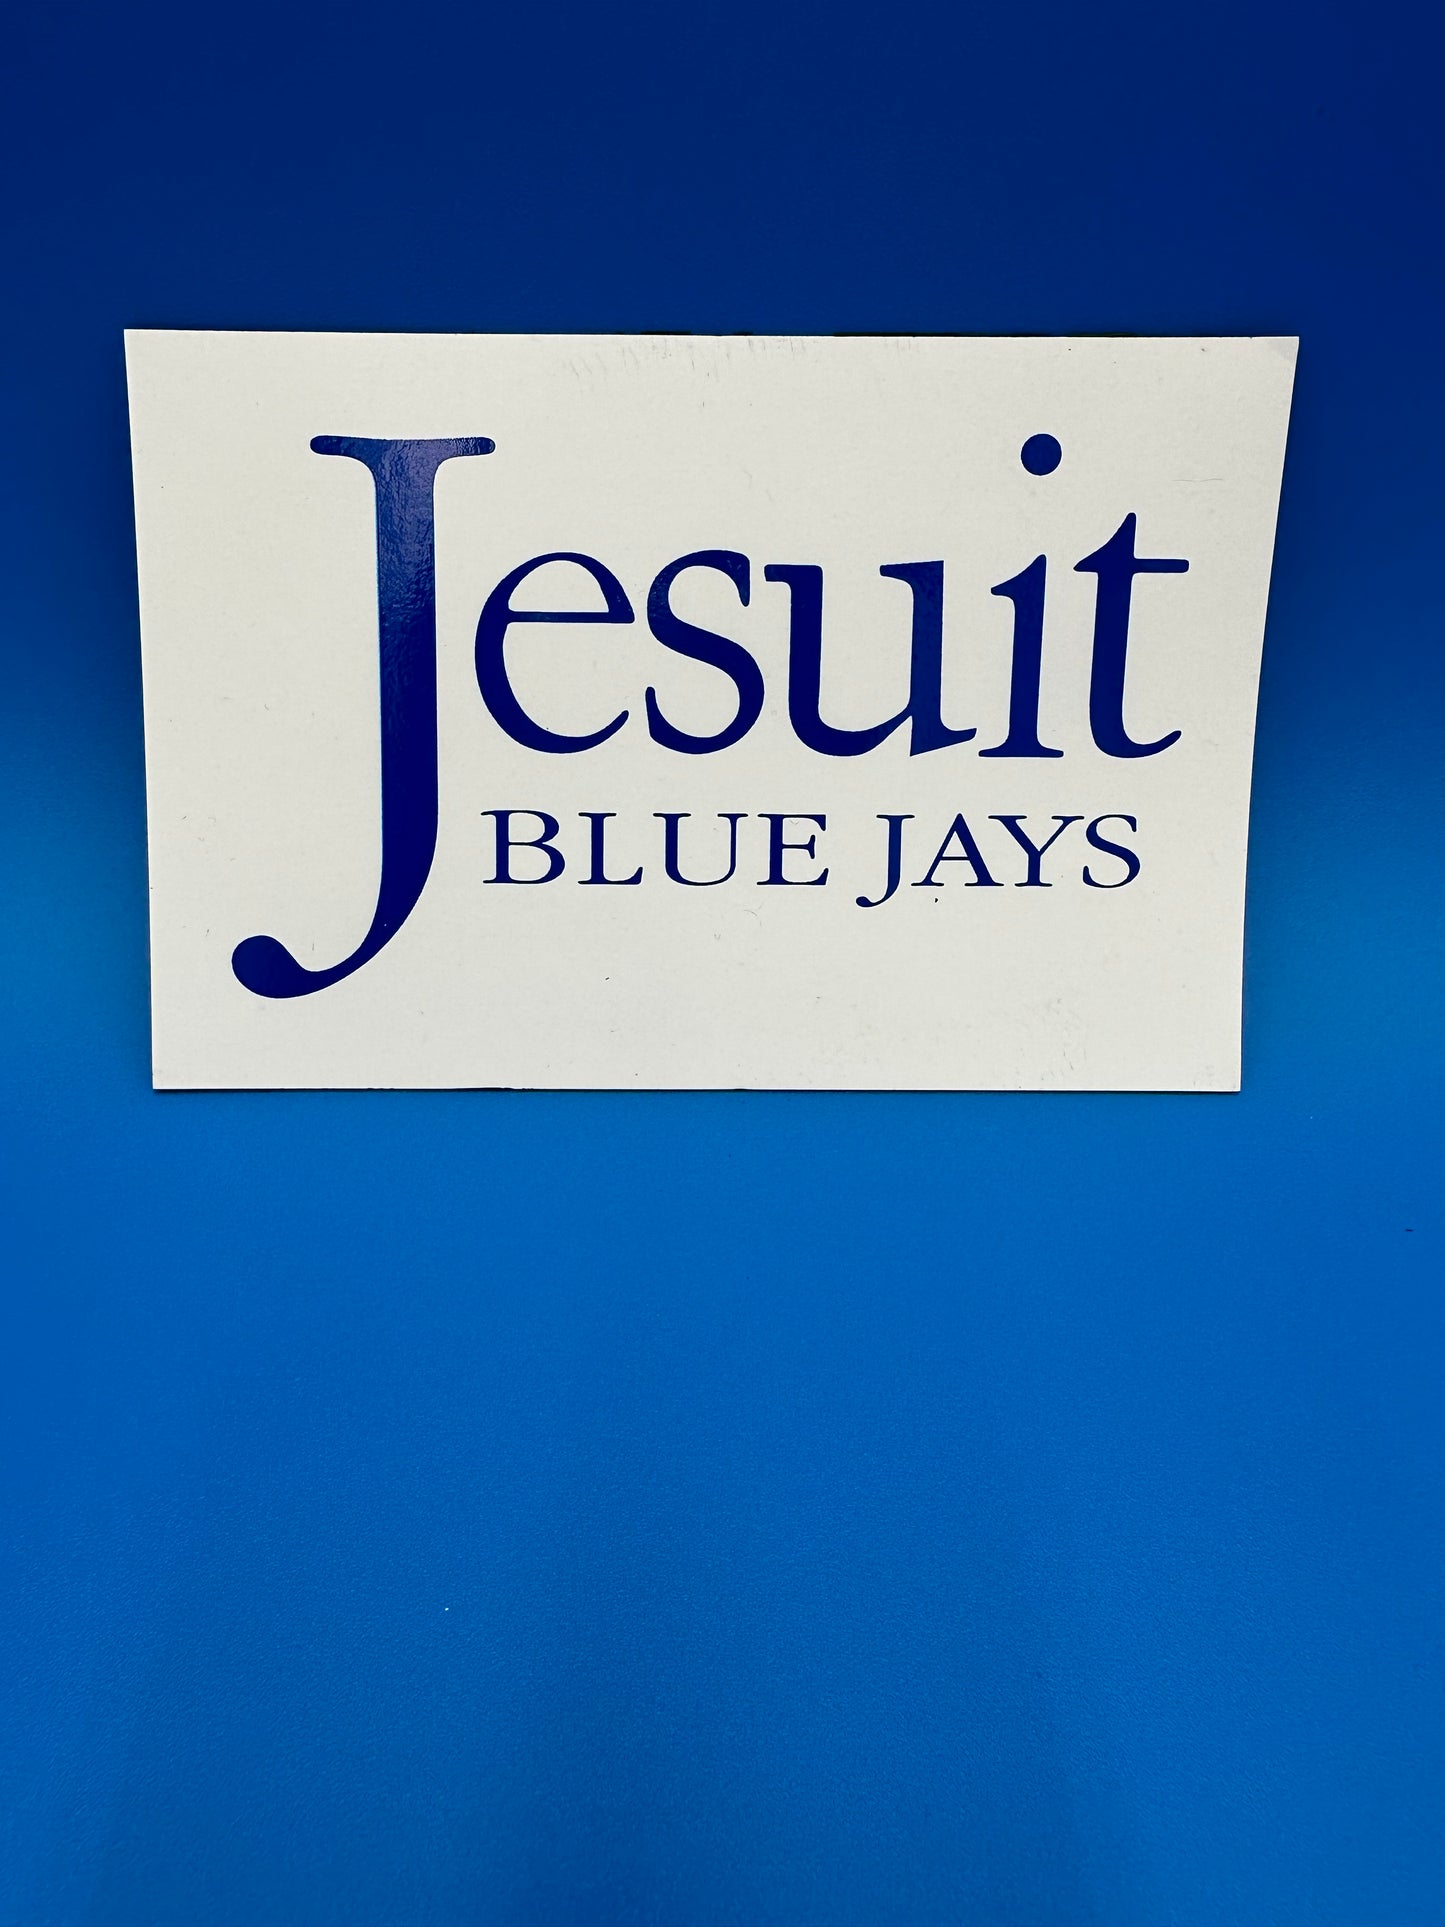 4 x 5 white magnet with Jesuit Blue Jays logo.  Show your Jesuit Spirit on your car or your refrigerator!